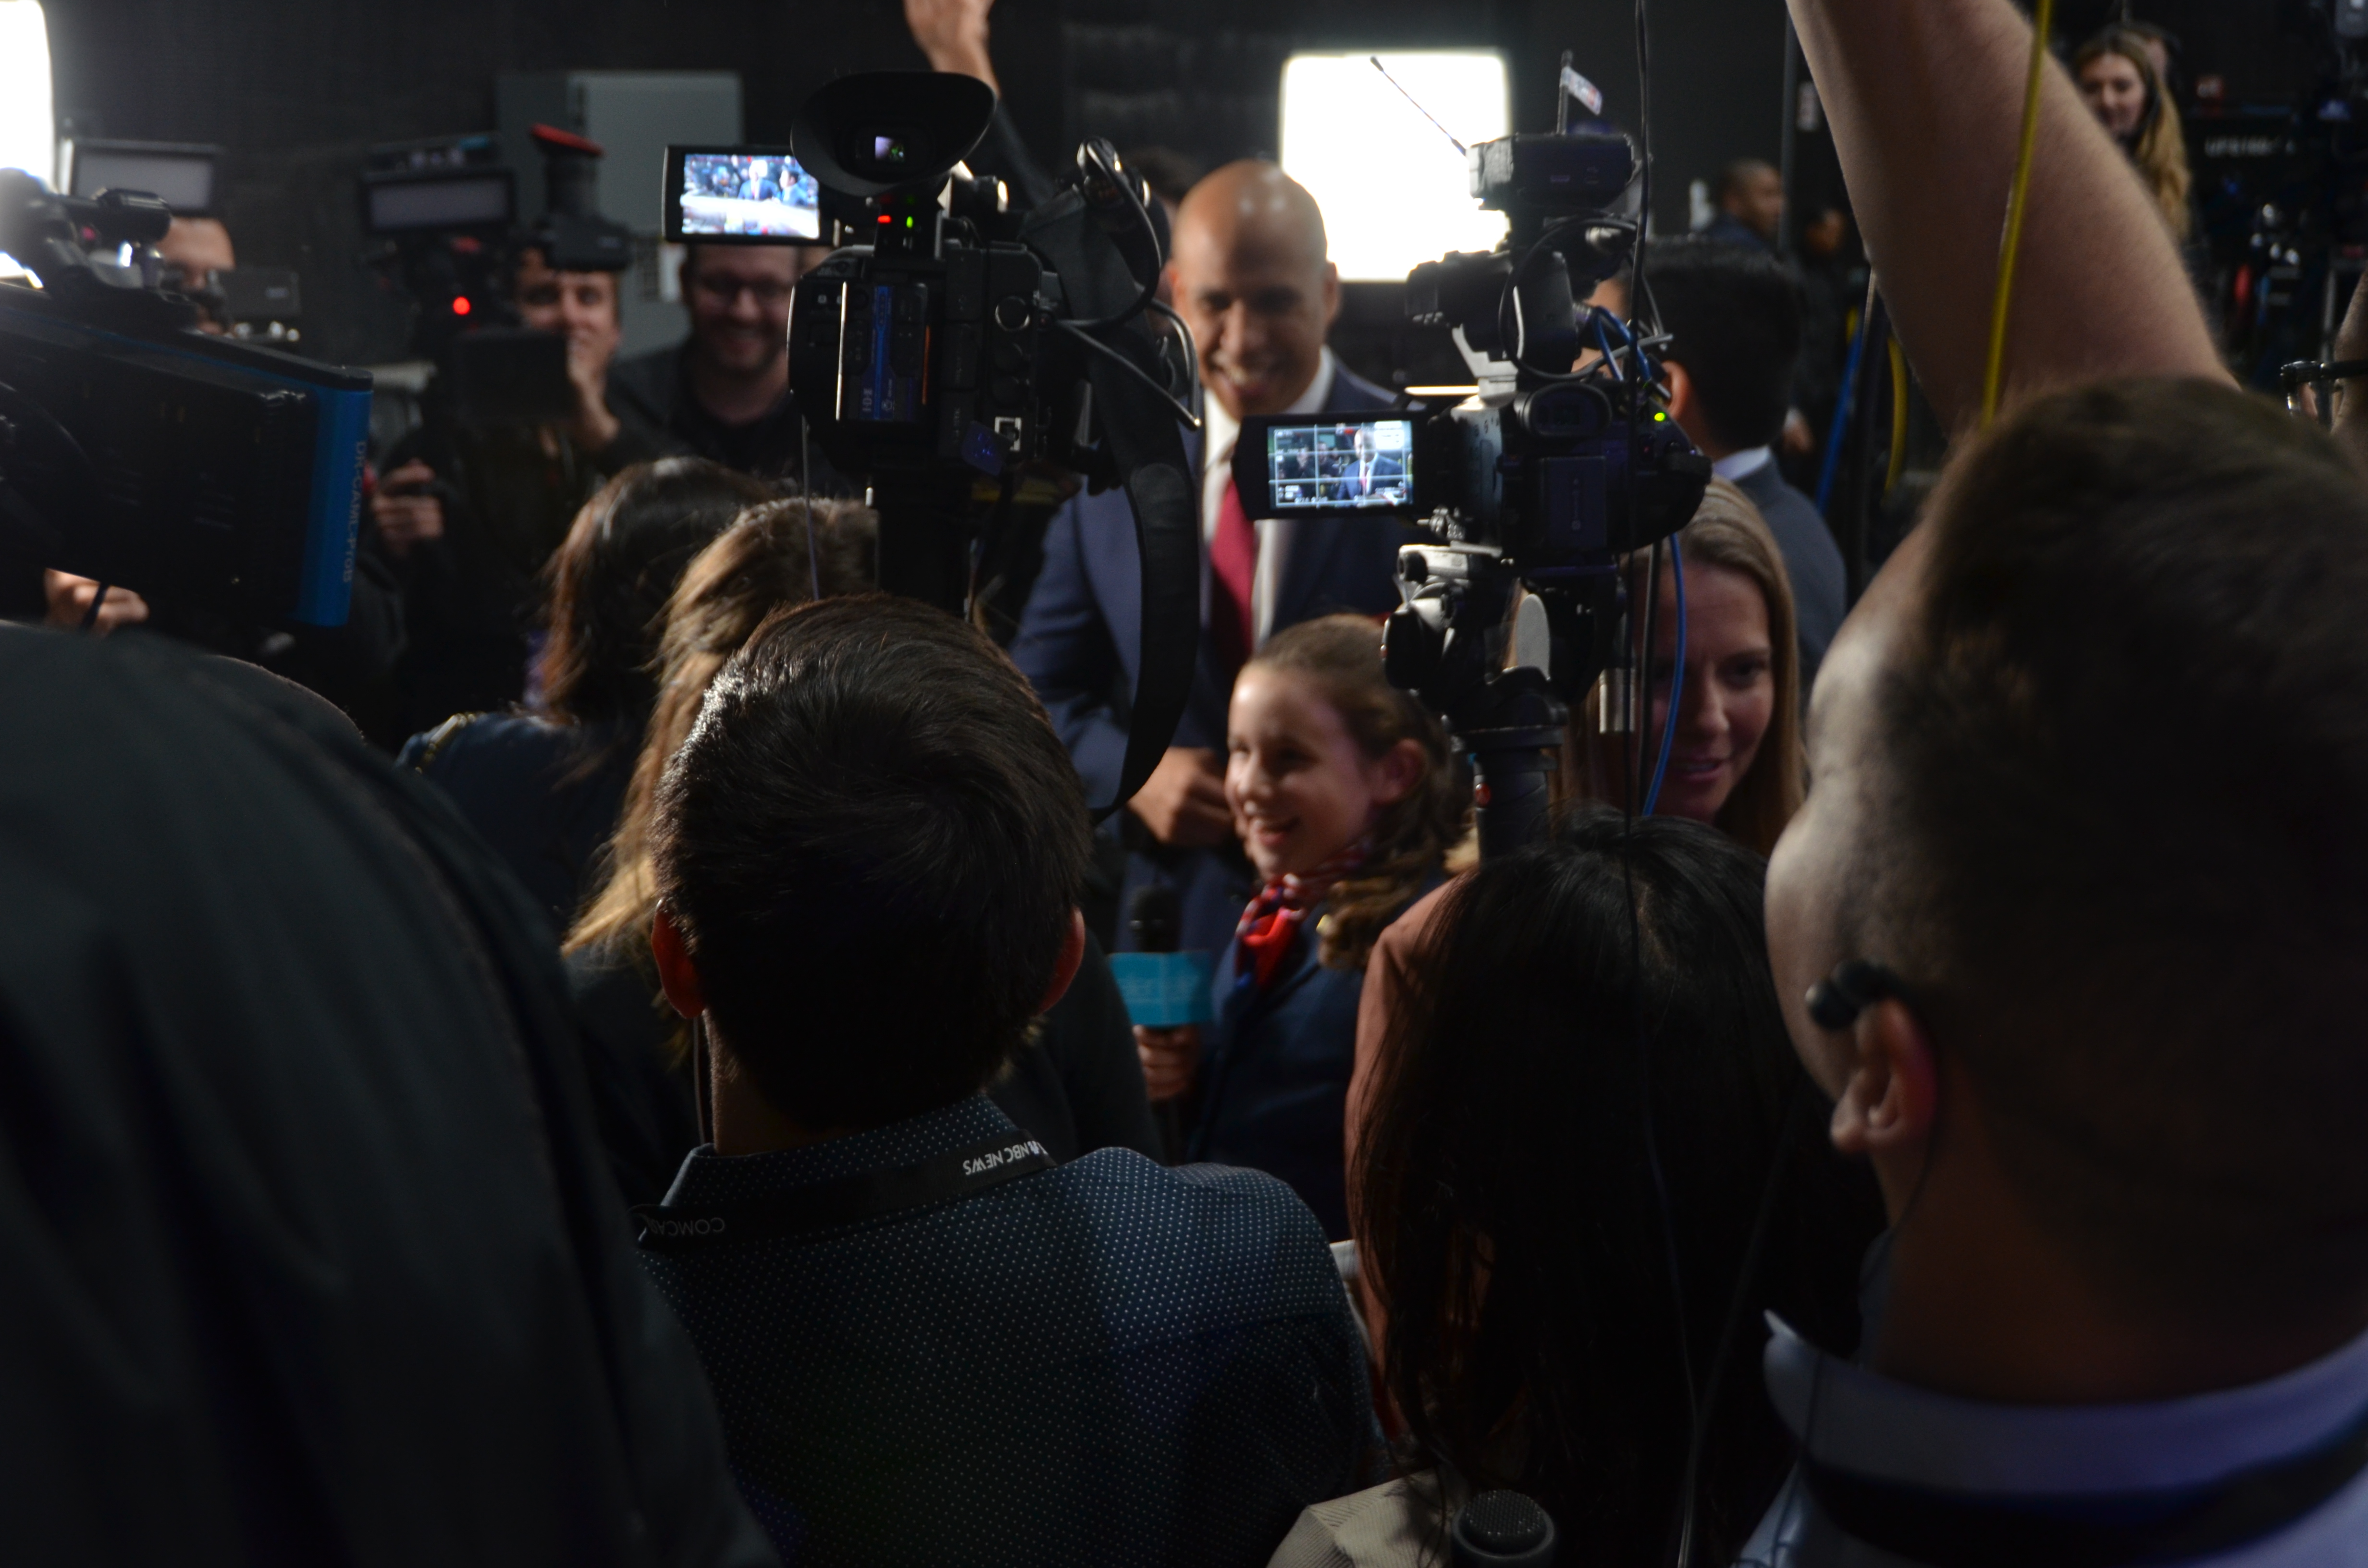 Behind the Scenes: Students Participate at the Democratic Debate